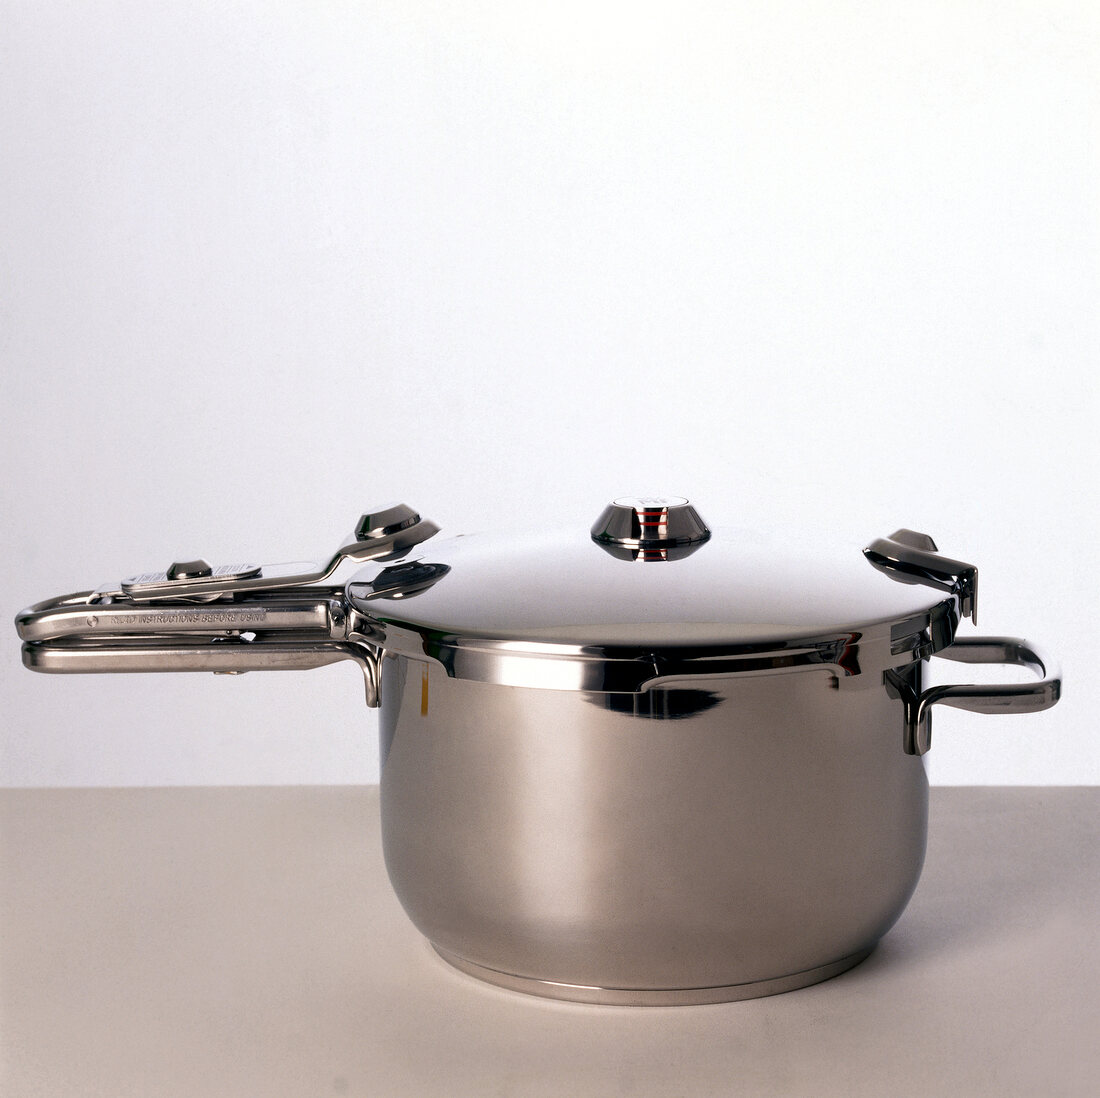 Stainless steel pressure cooker on gray surface